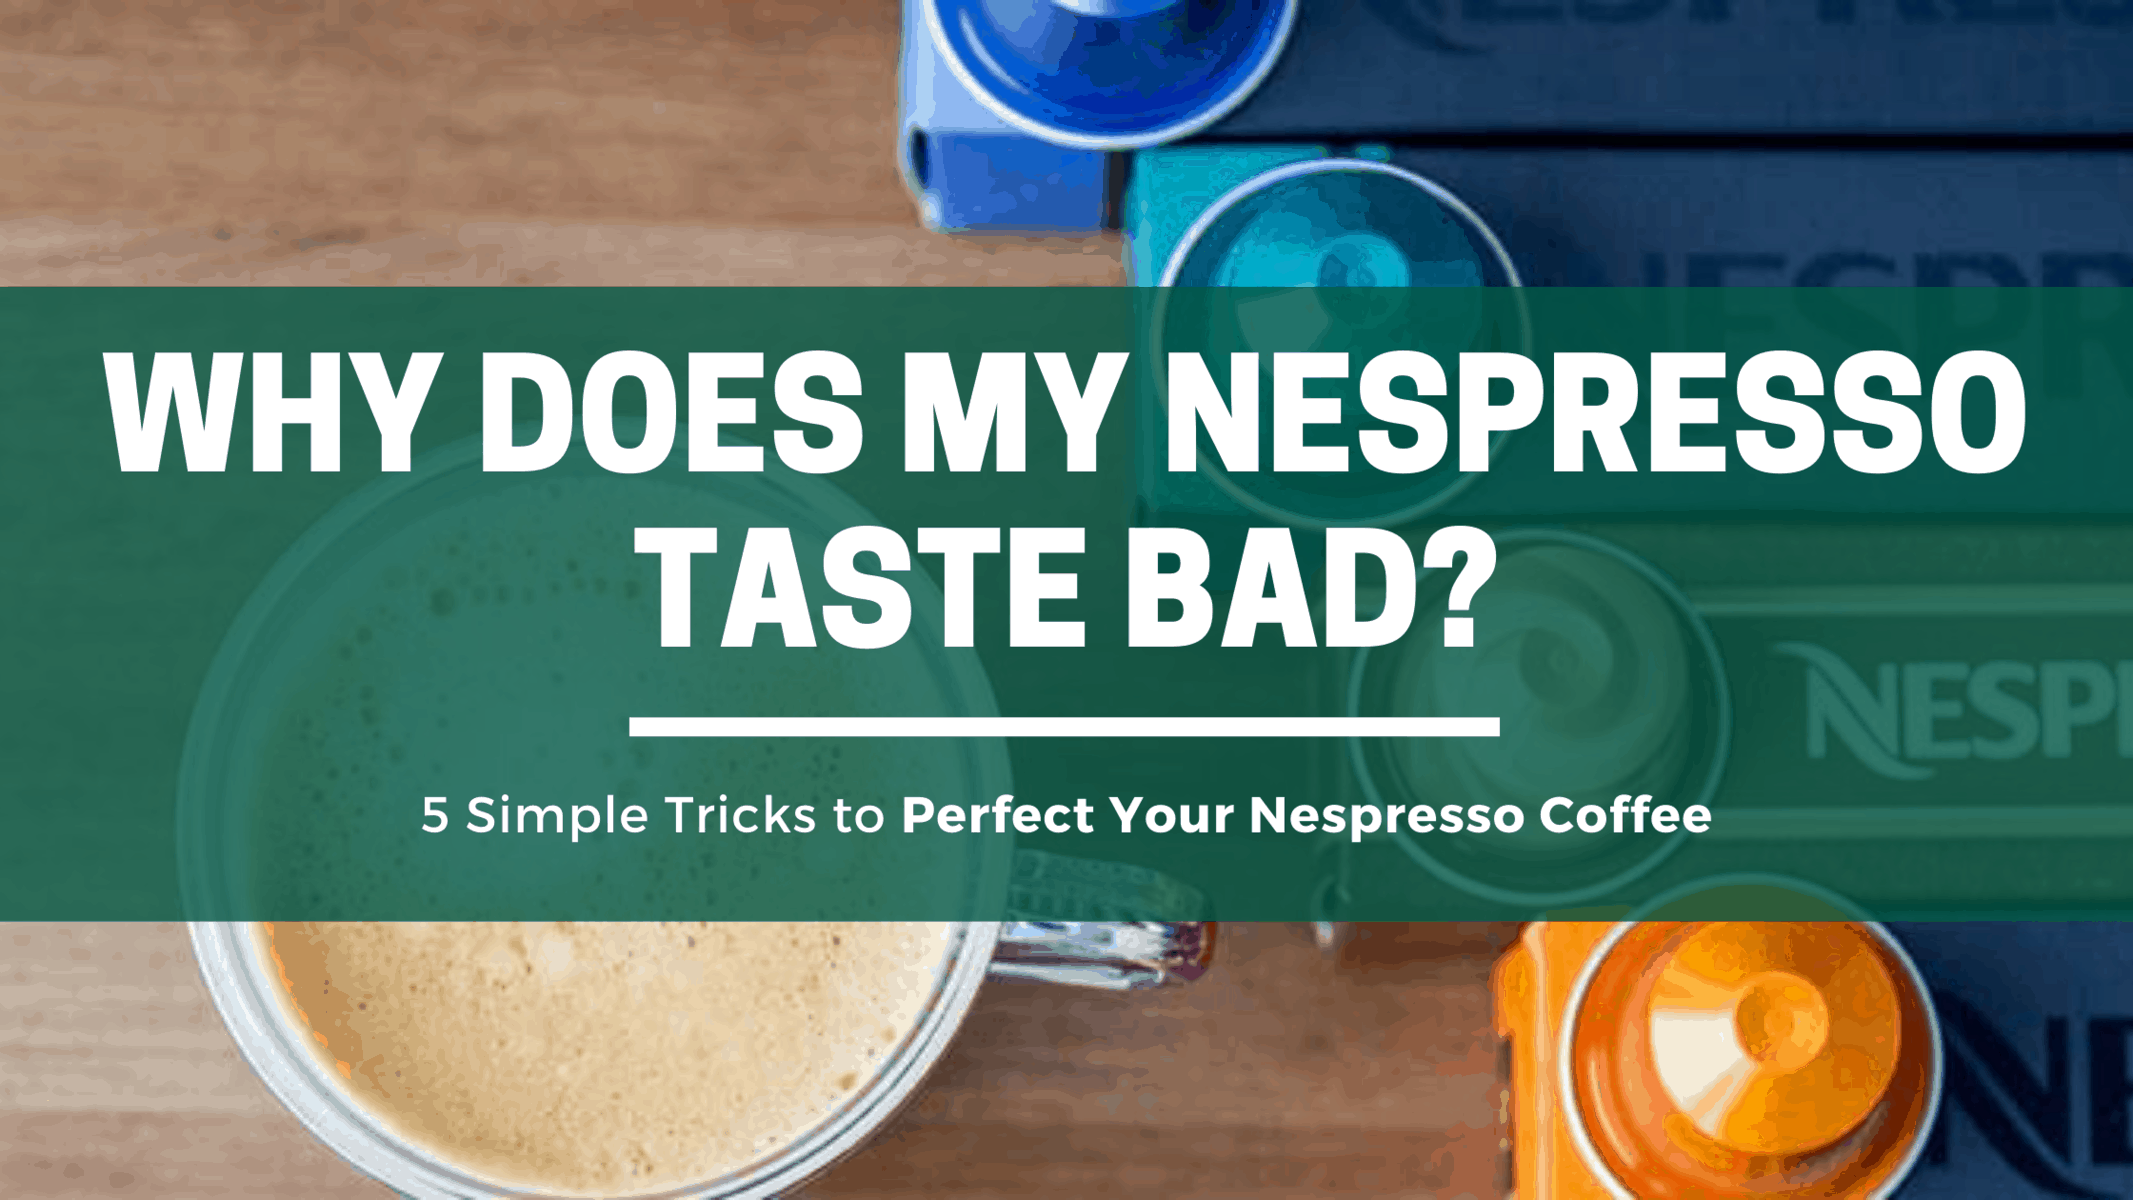 https://a14ec4c7.flyingcdn.com/wp-content/uploads/2020/06/5-Simple-Tricks-to-Perfect-Your-Nespresso-Coffee.png